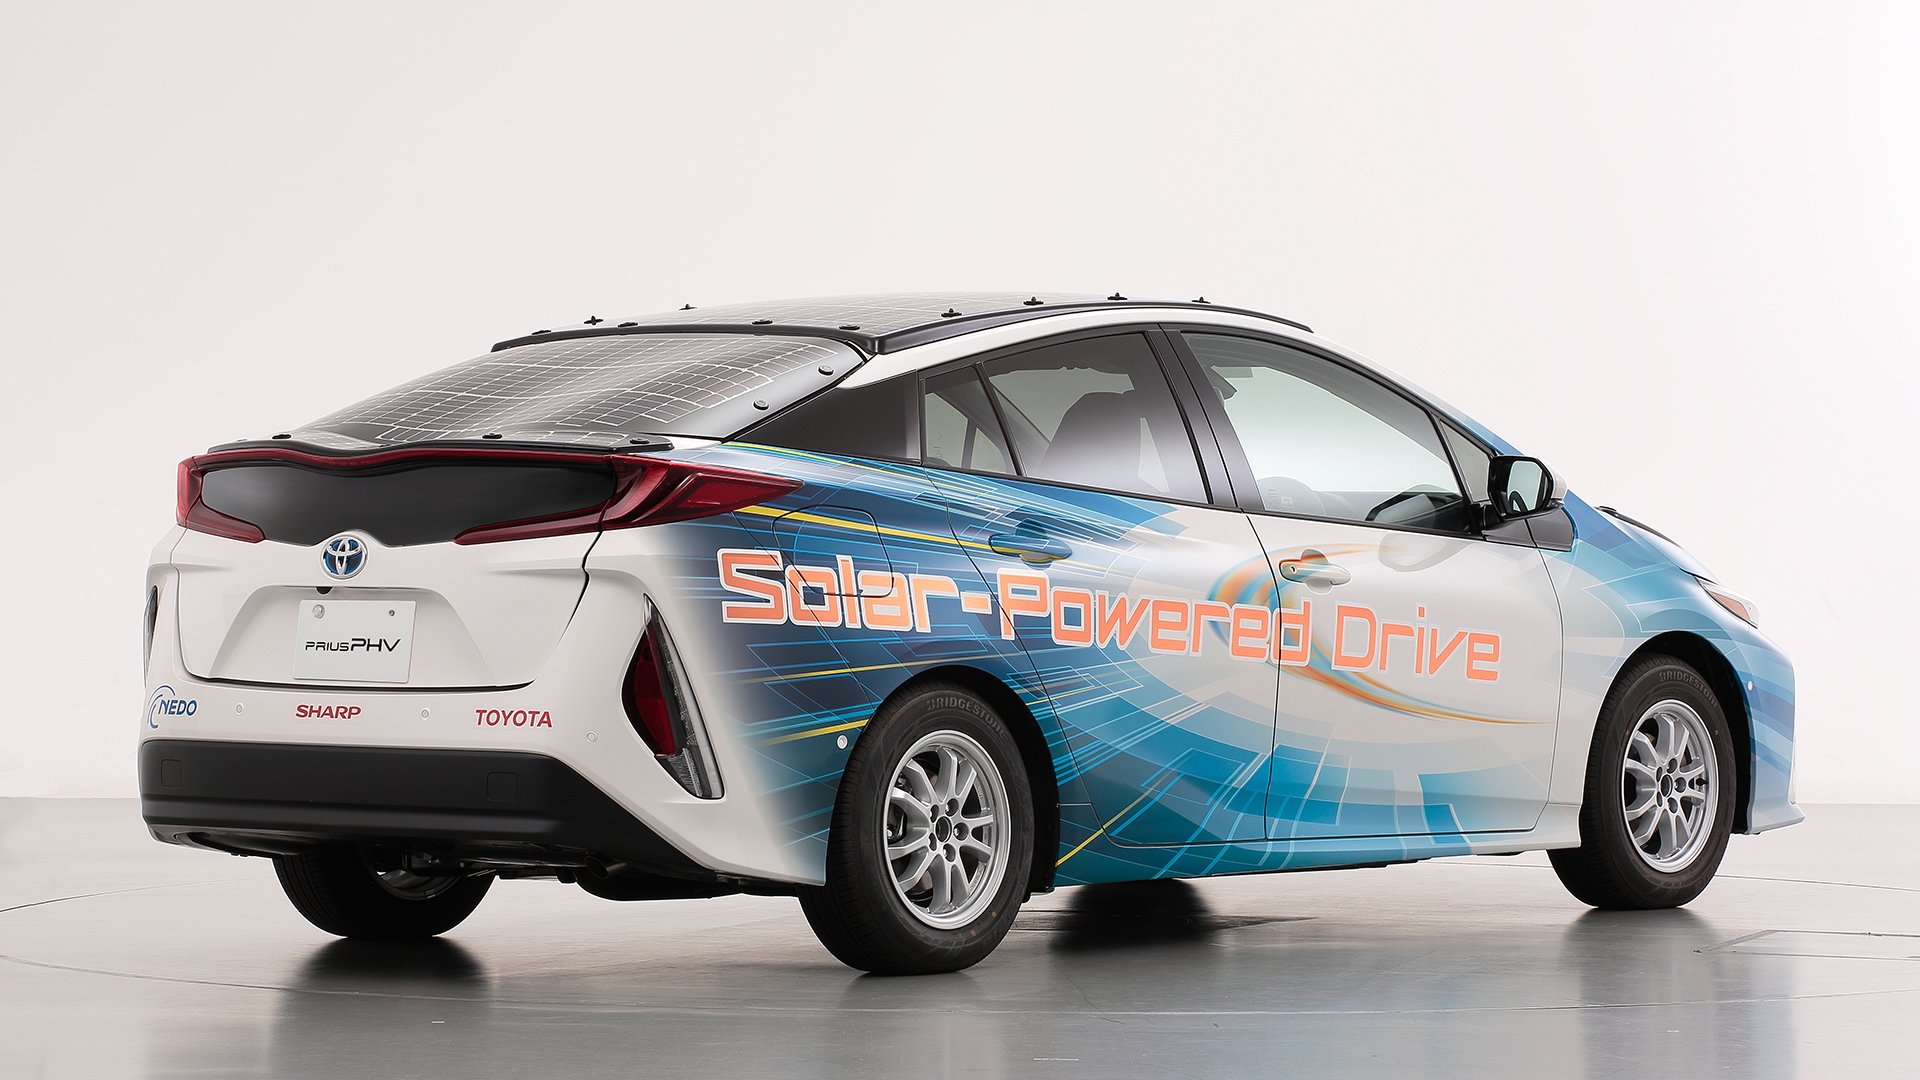 Toyota Prius Prime PHV test vehicle with solar panels in Japan